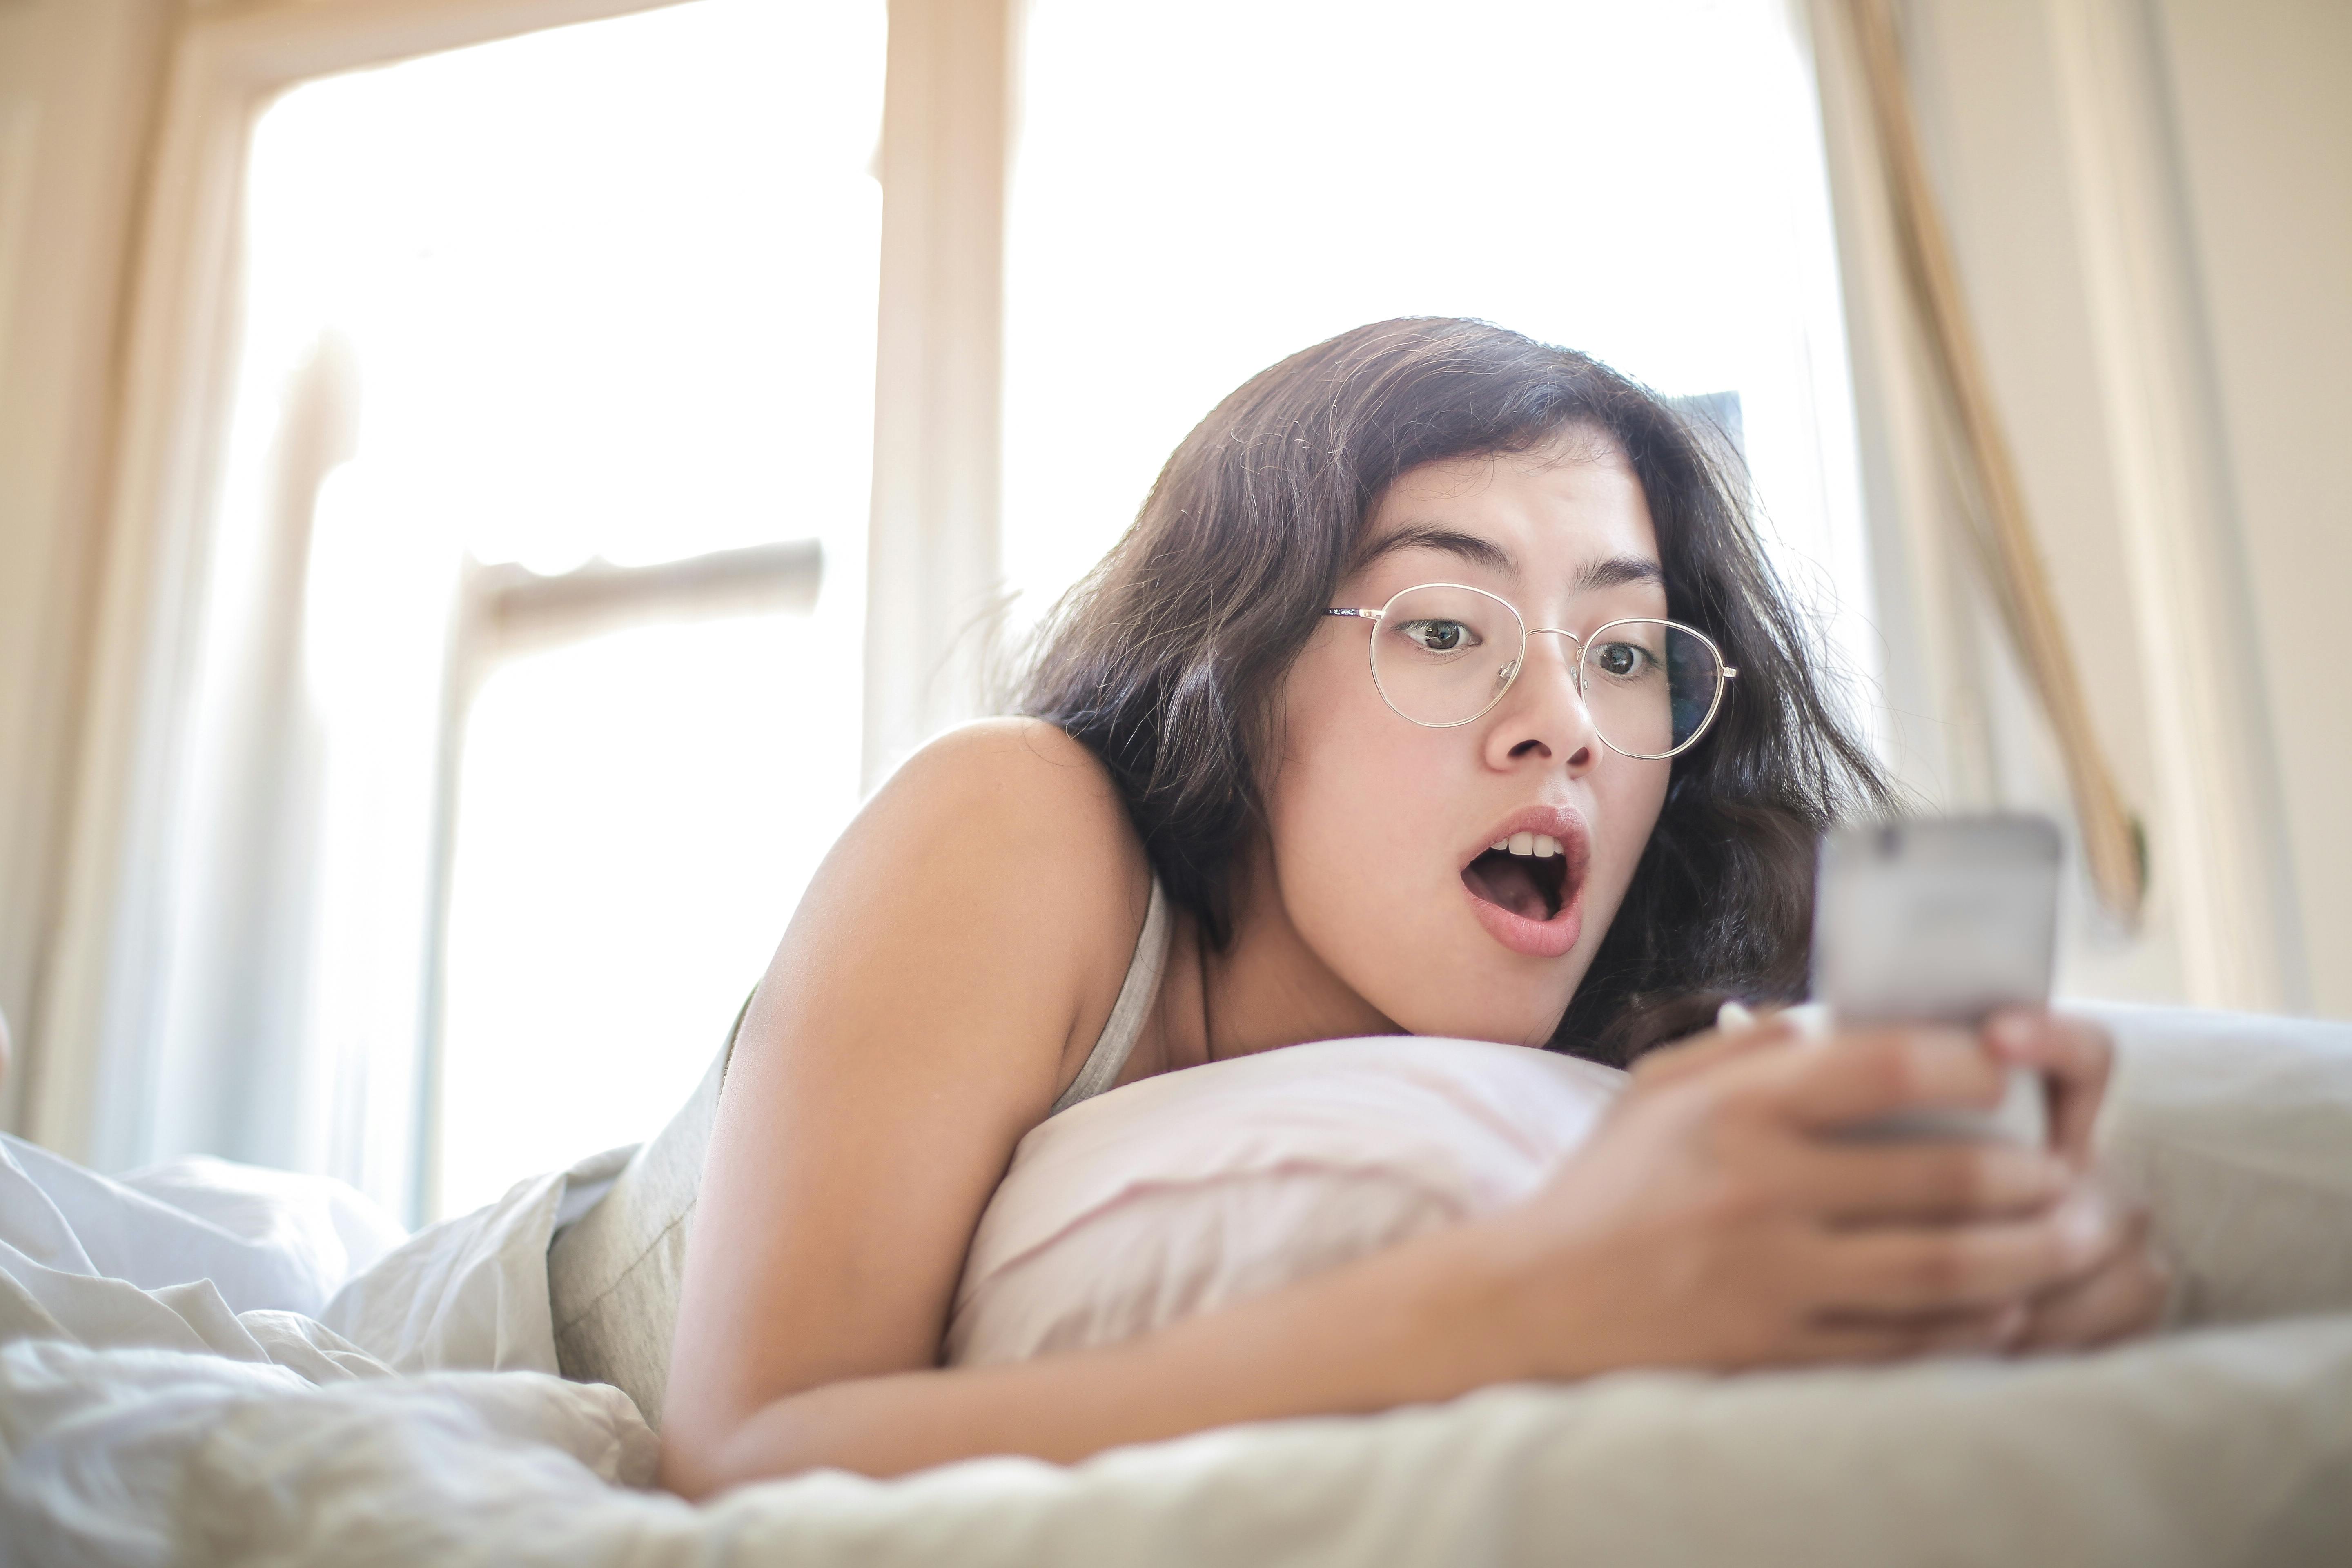 A shocked woman lying in bed holding her phone | Source: Pexels